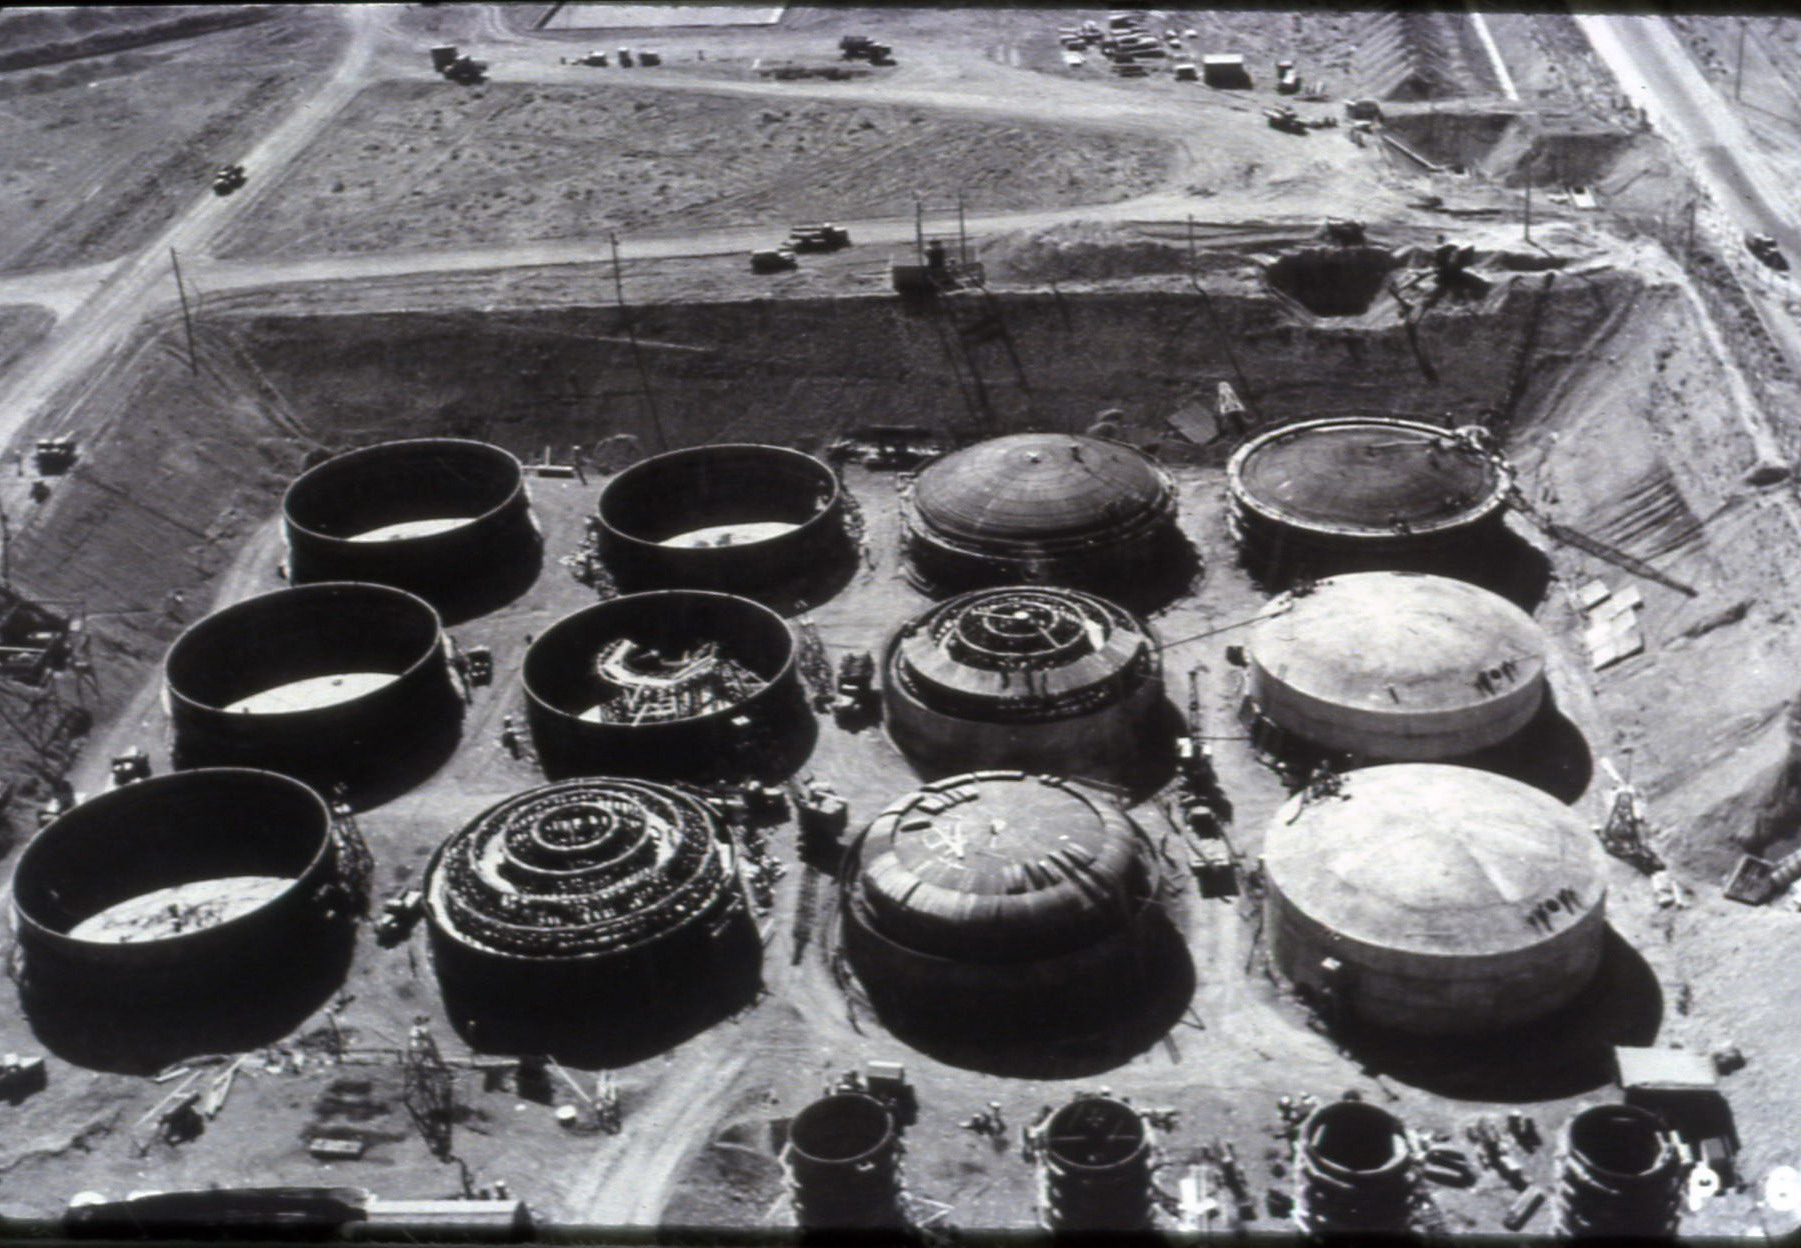 Black and white aerial view of the B Tank Farm at Hanford under construction in the 1940s, showing massive storage tanks in varying states of construction. 